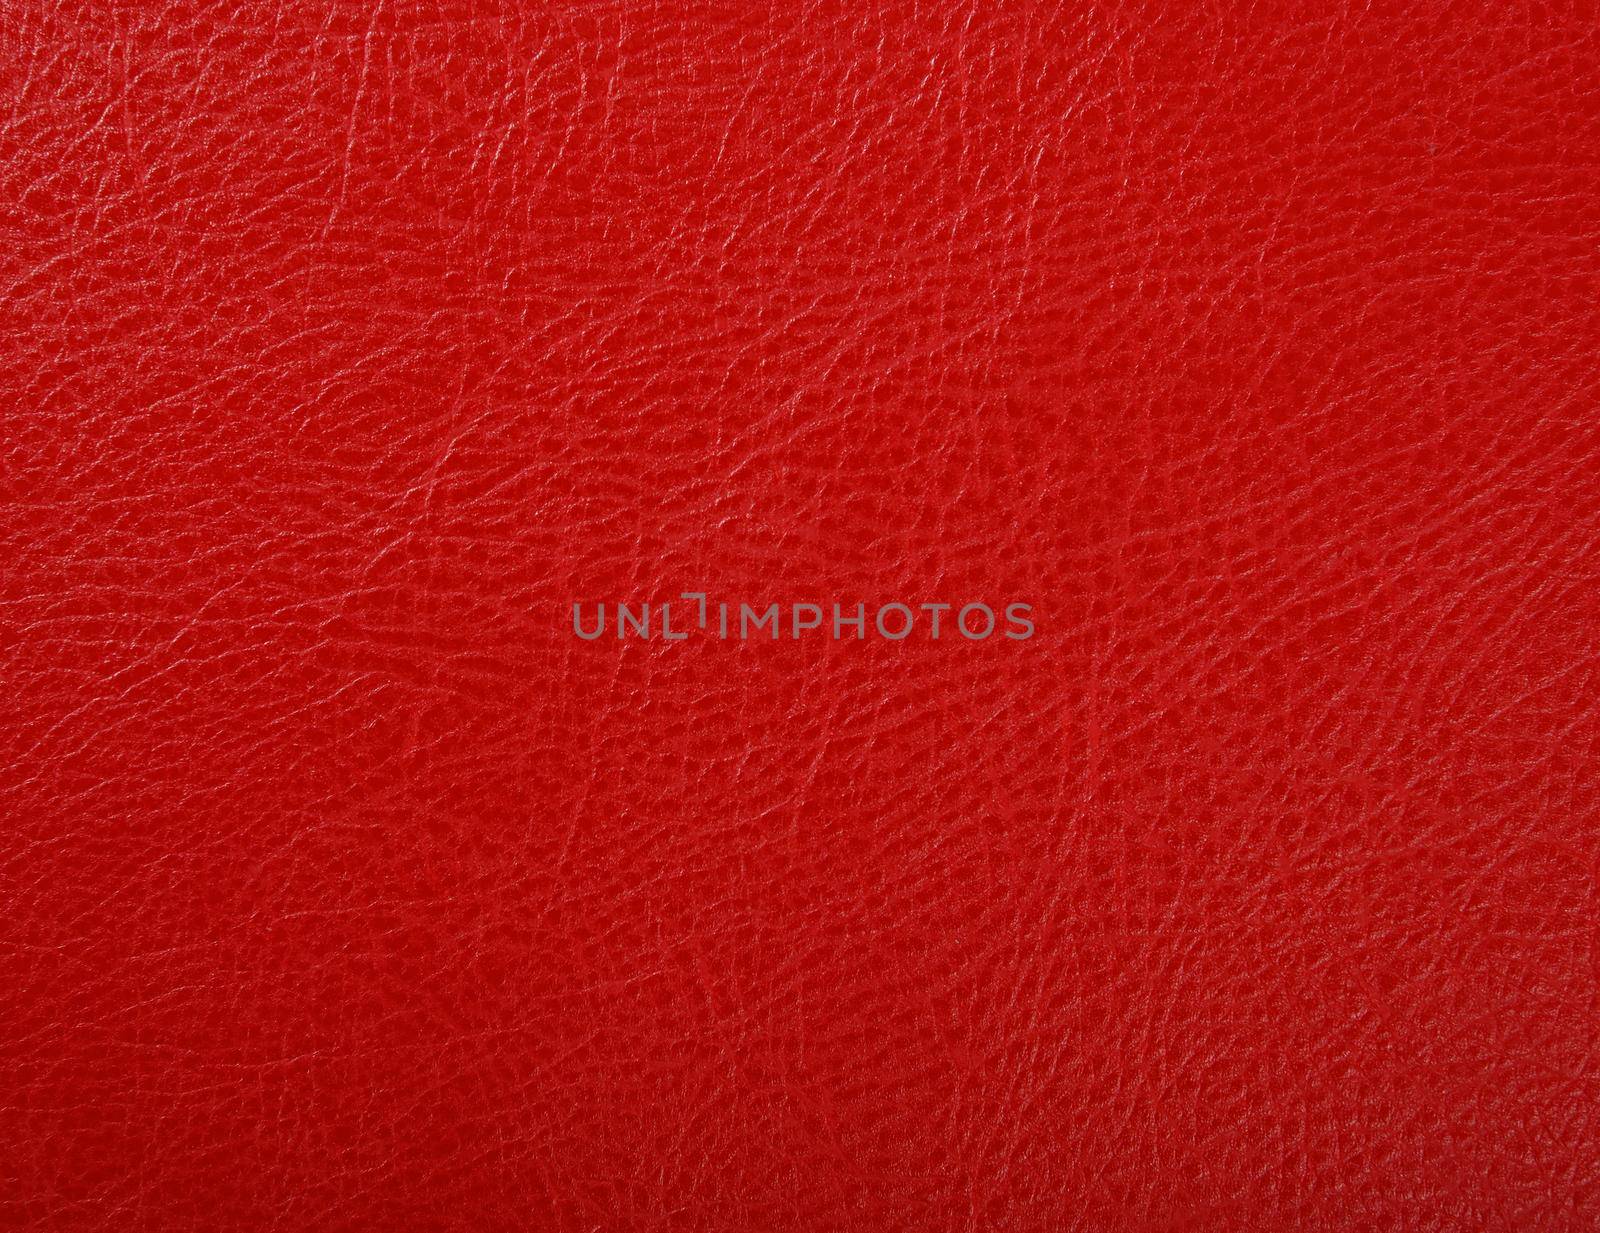 Close up background texture pattern of scarlet red natural leather grain, directly above